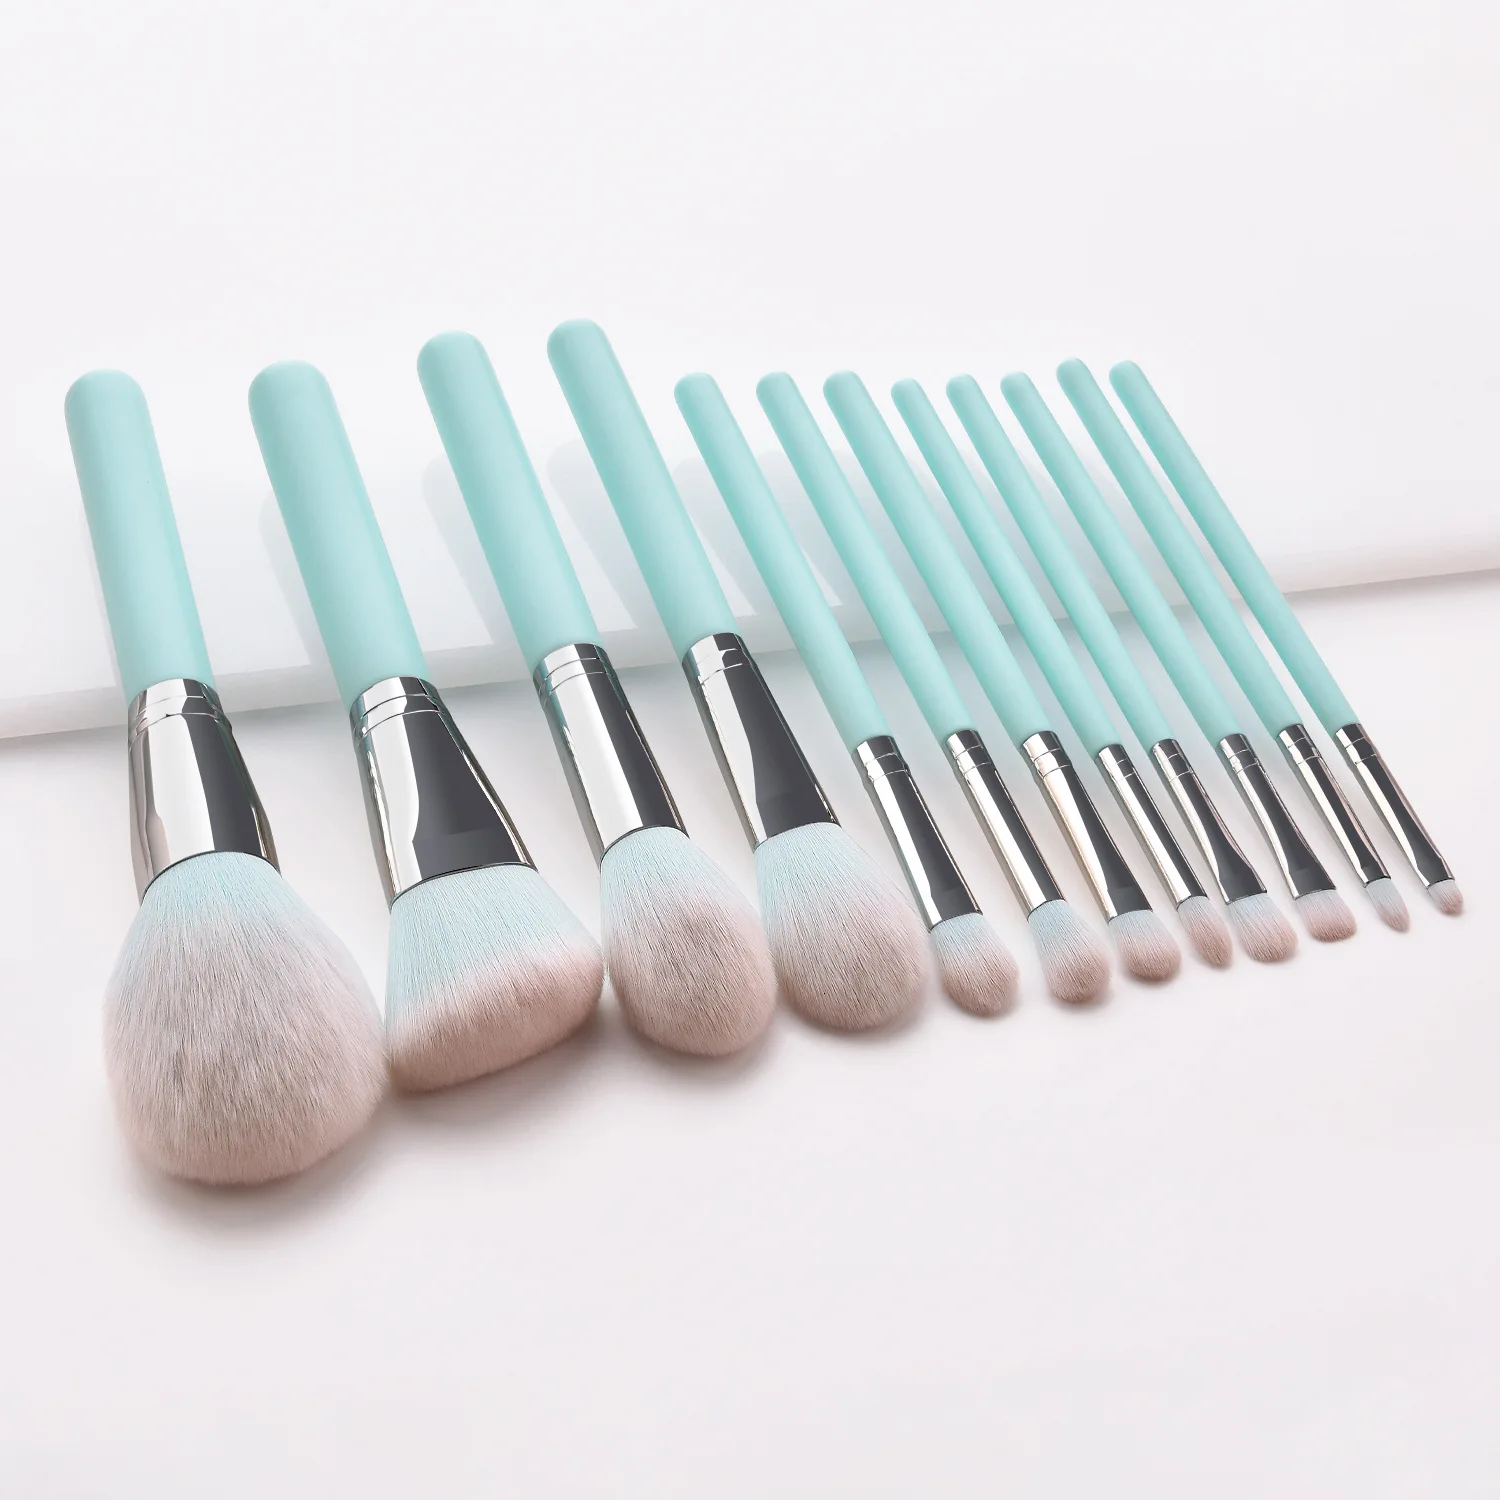 New products professional High quality 12 pcs makeup brush set with blue pouch